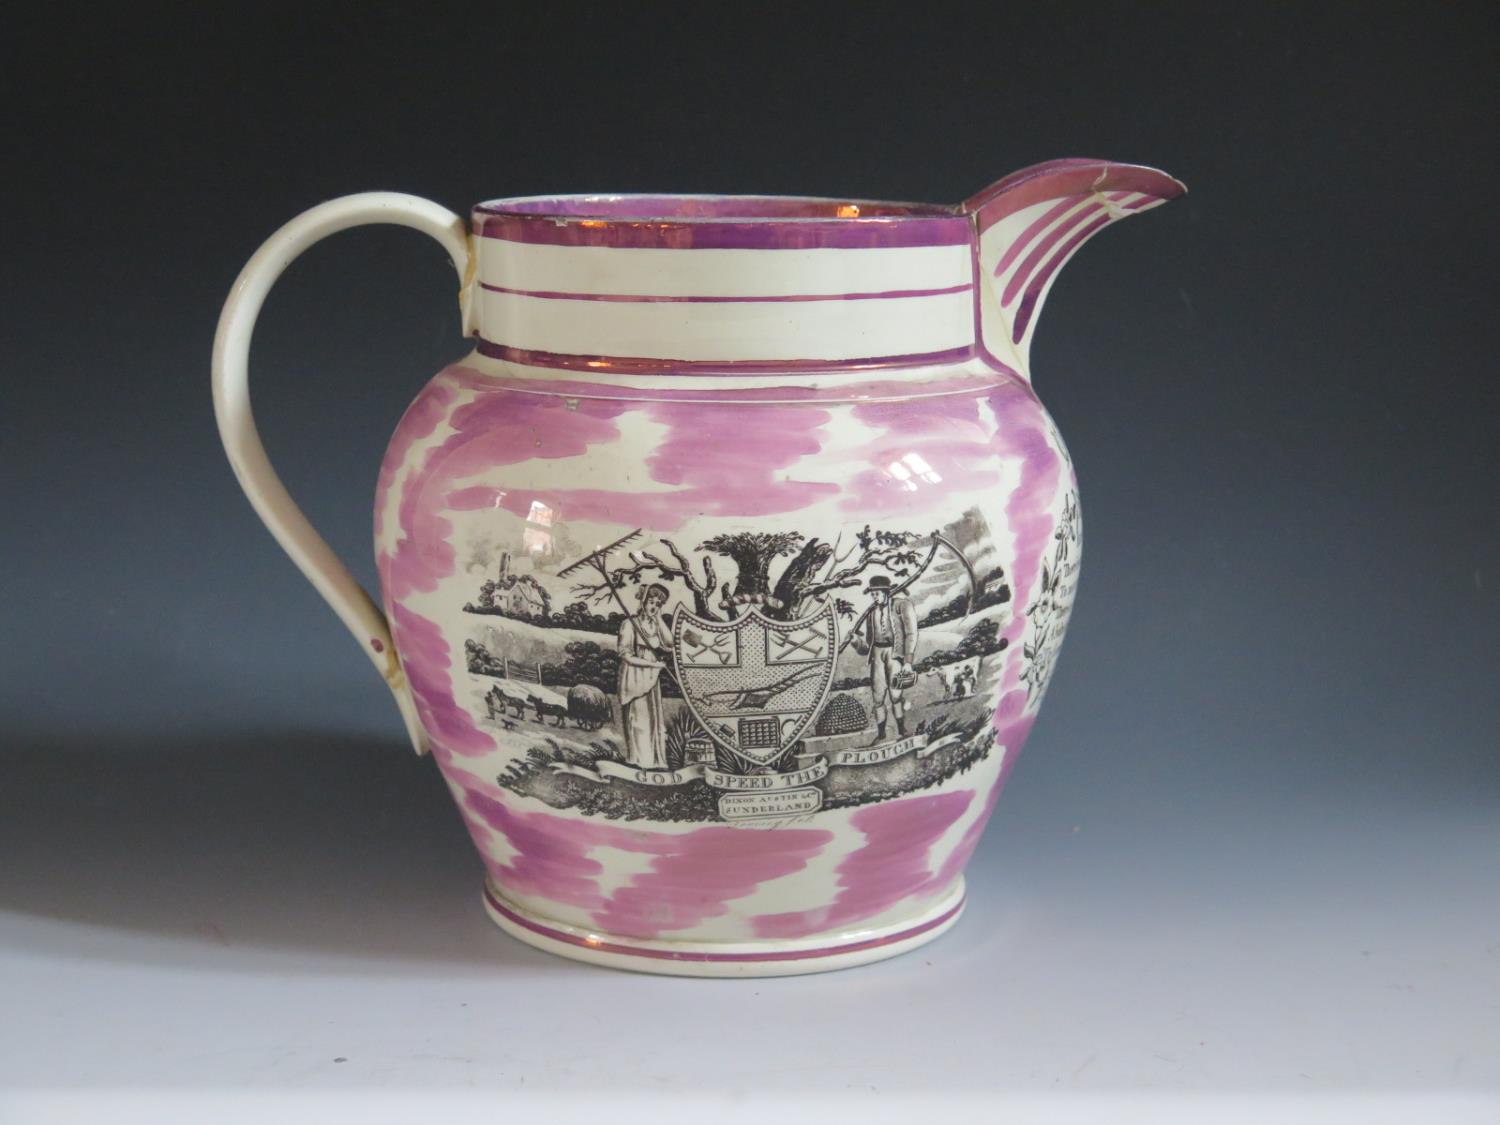 A Dixon Austin Co. Sunderland Lustre Jug _God Speed The Plough _ decorated in monochrome with